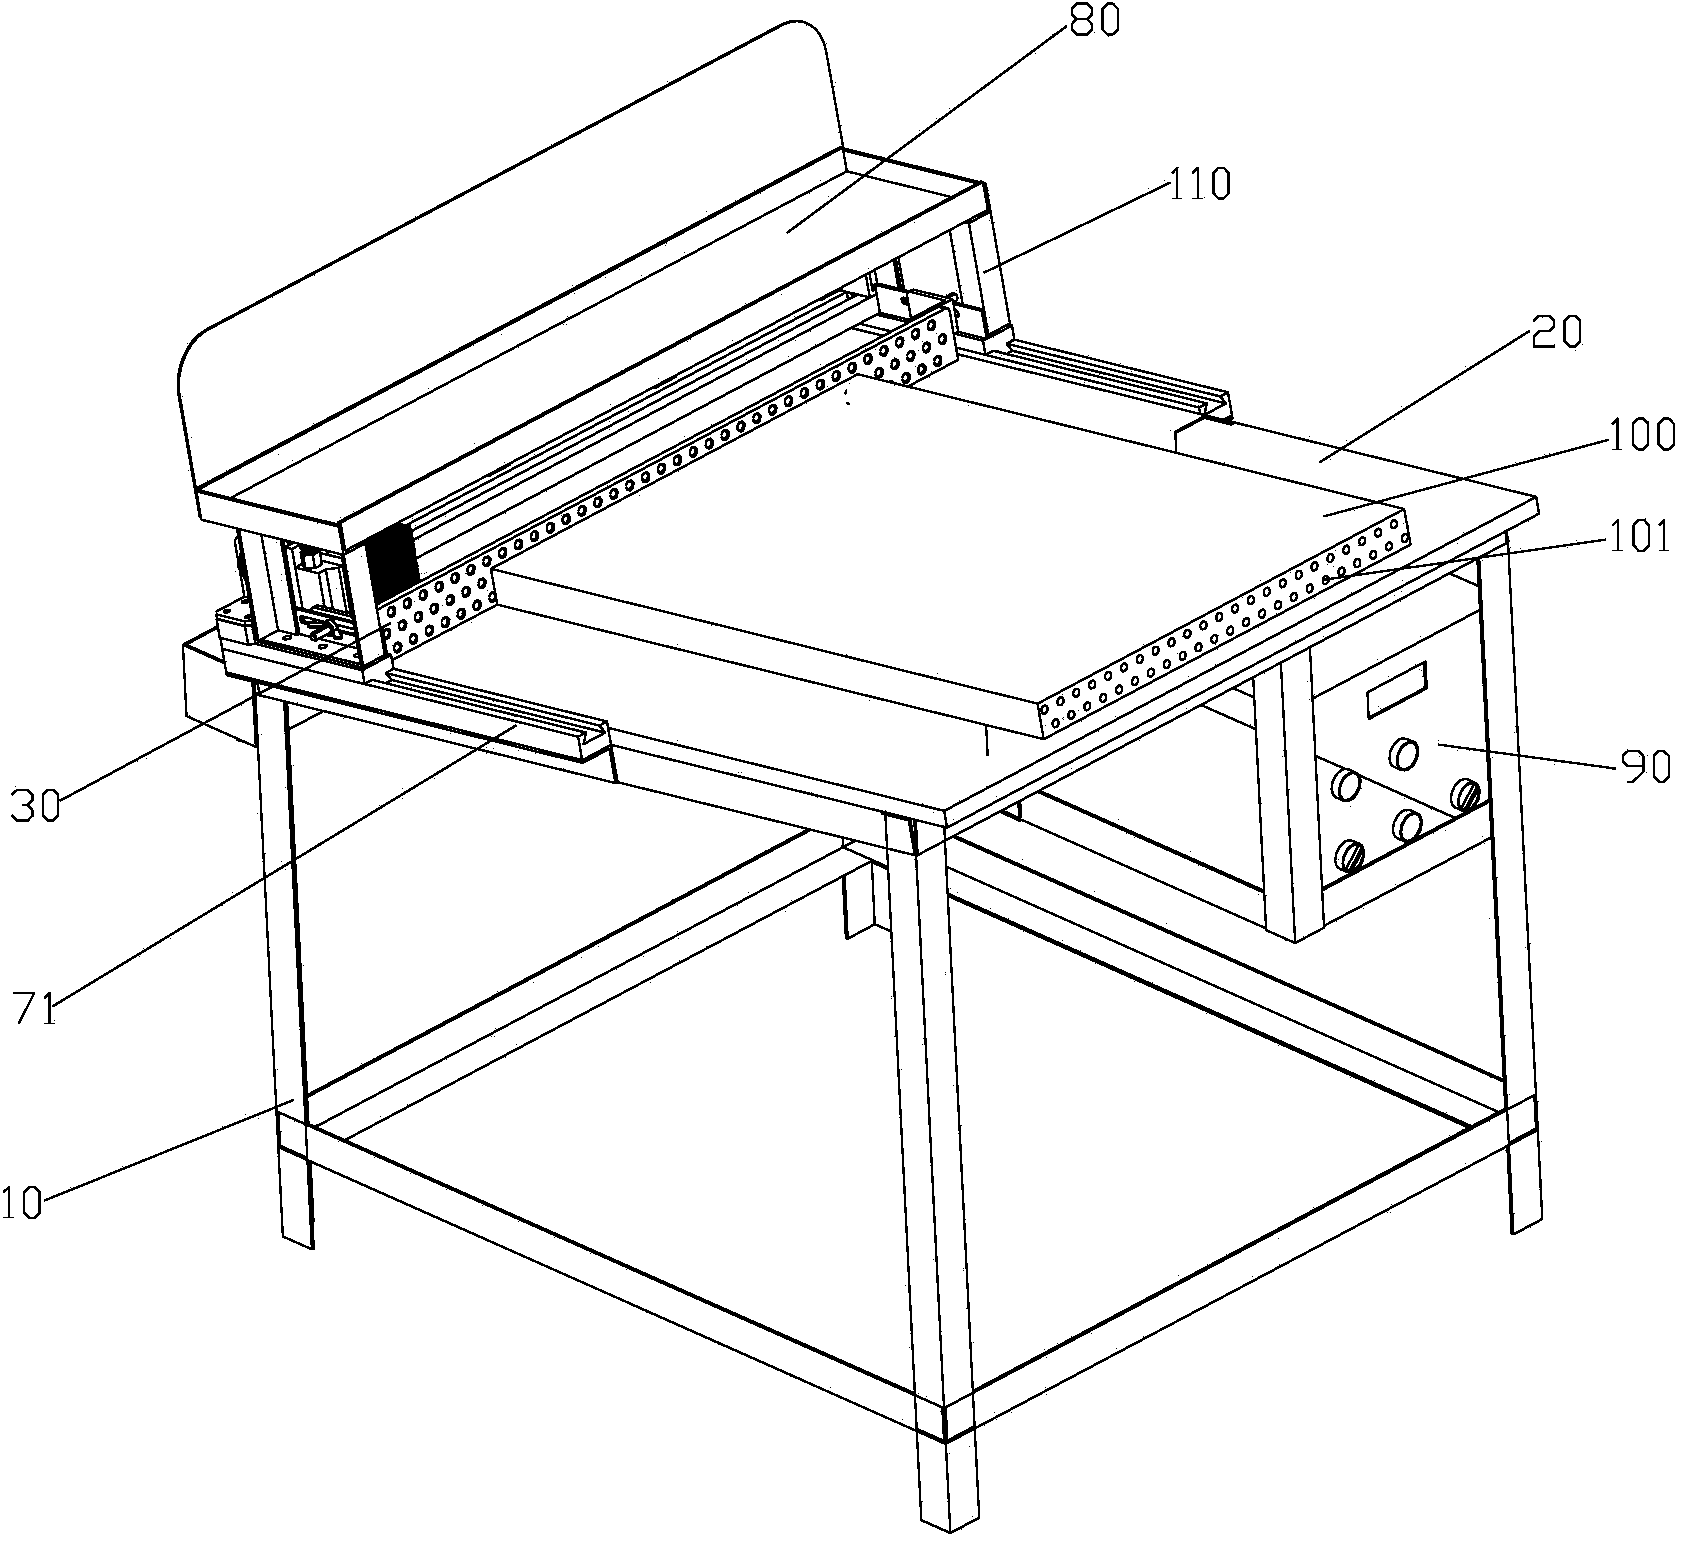 Pipe-penetrating work table